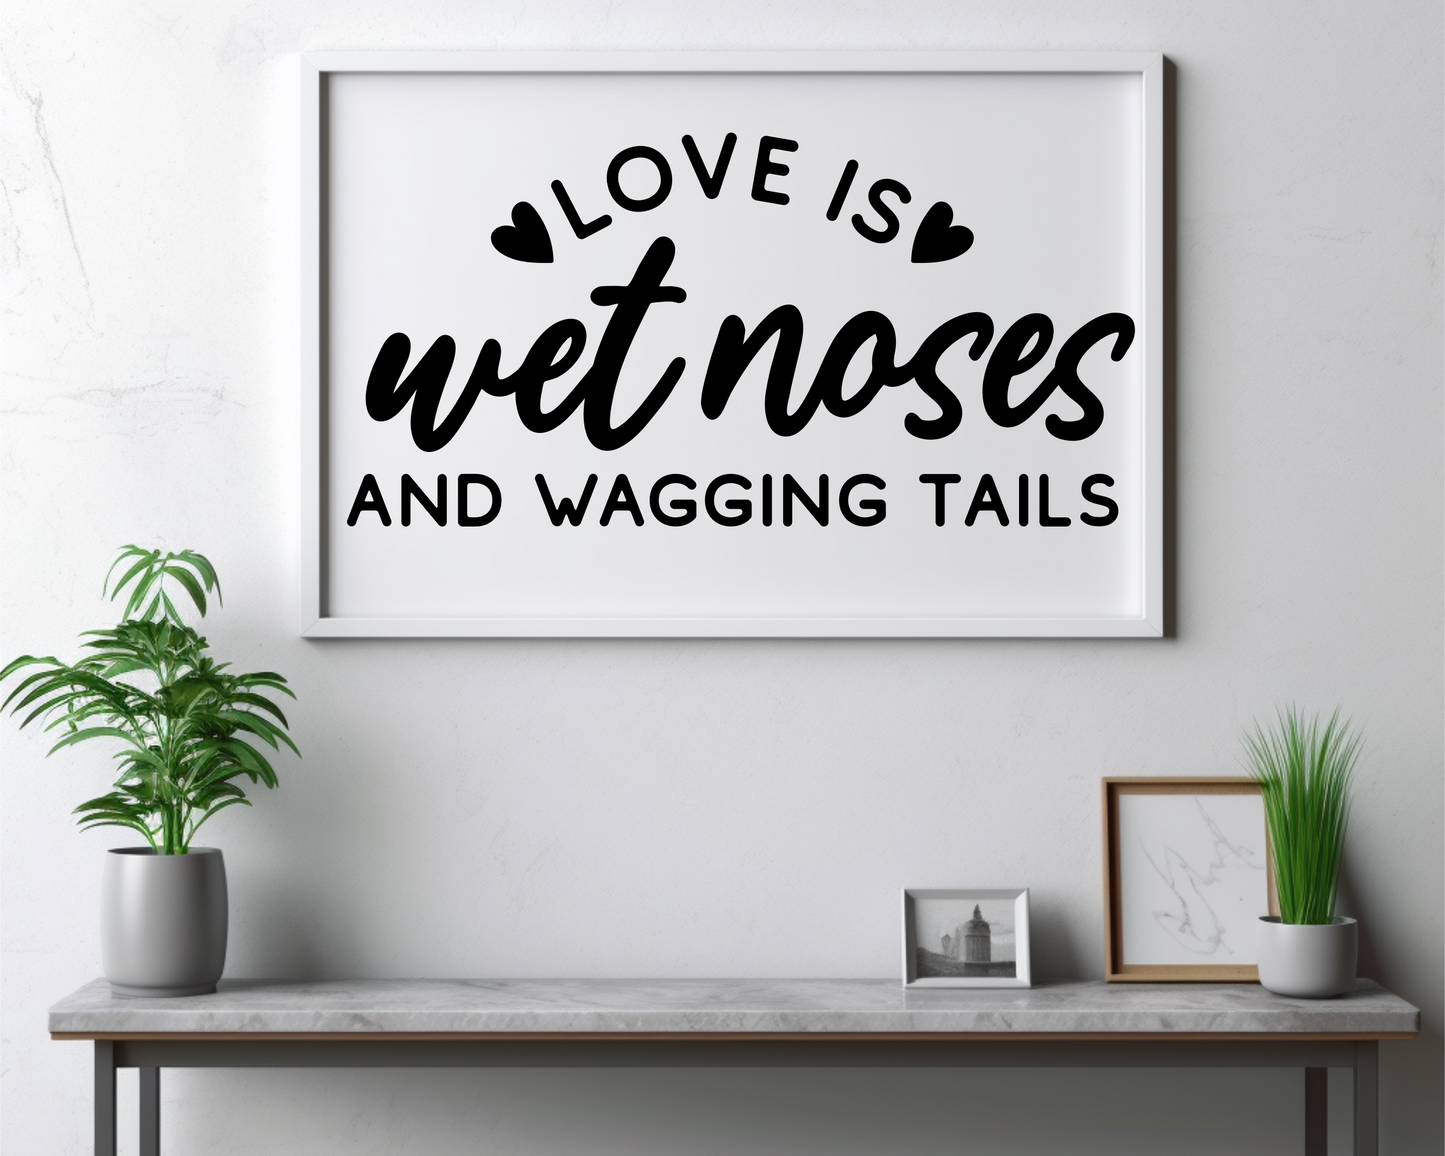 Love Is Wet Noses and Wagging Tails Vinyl Decal Sticker